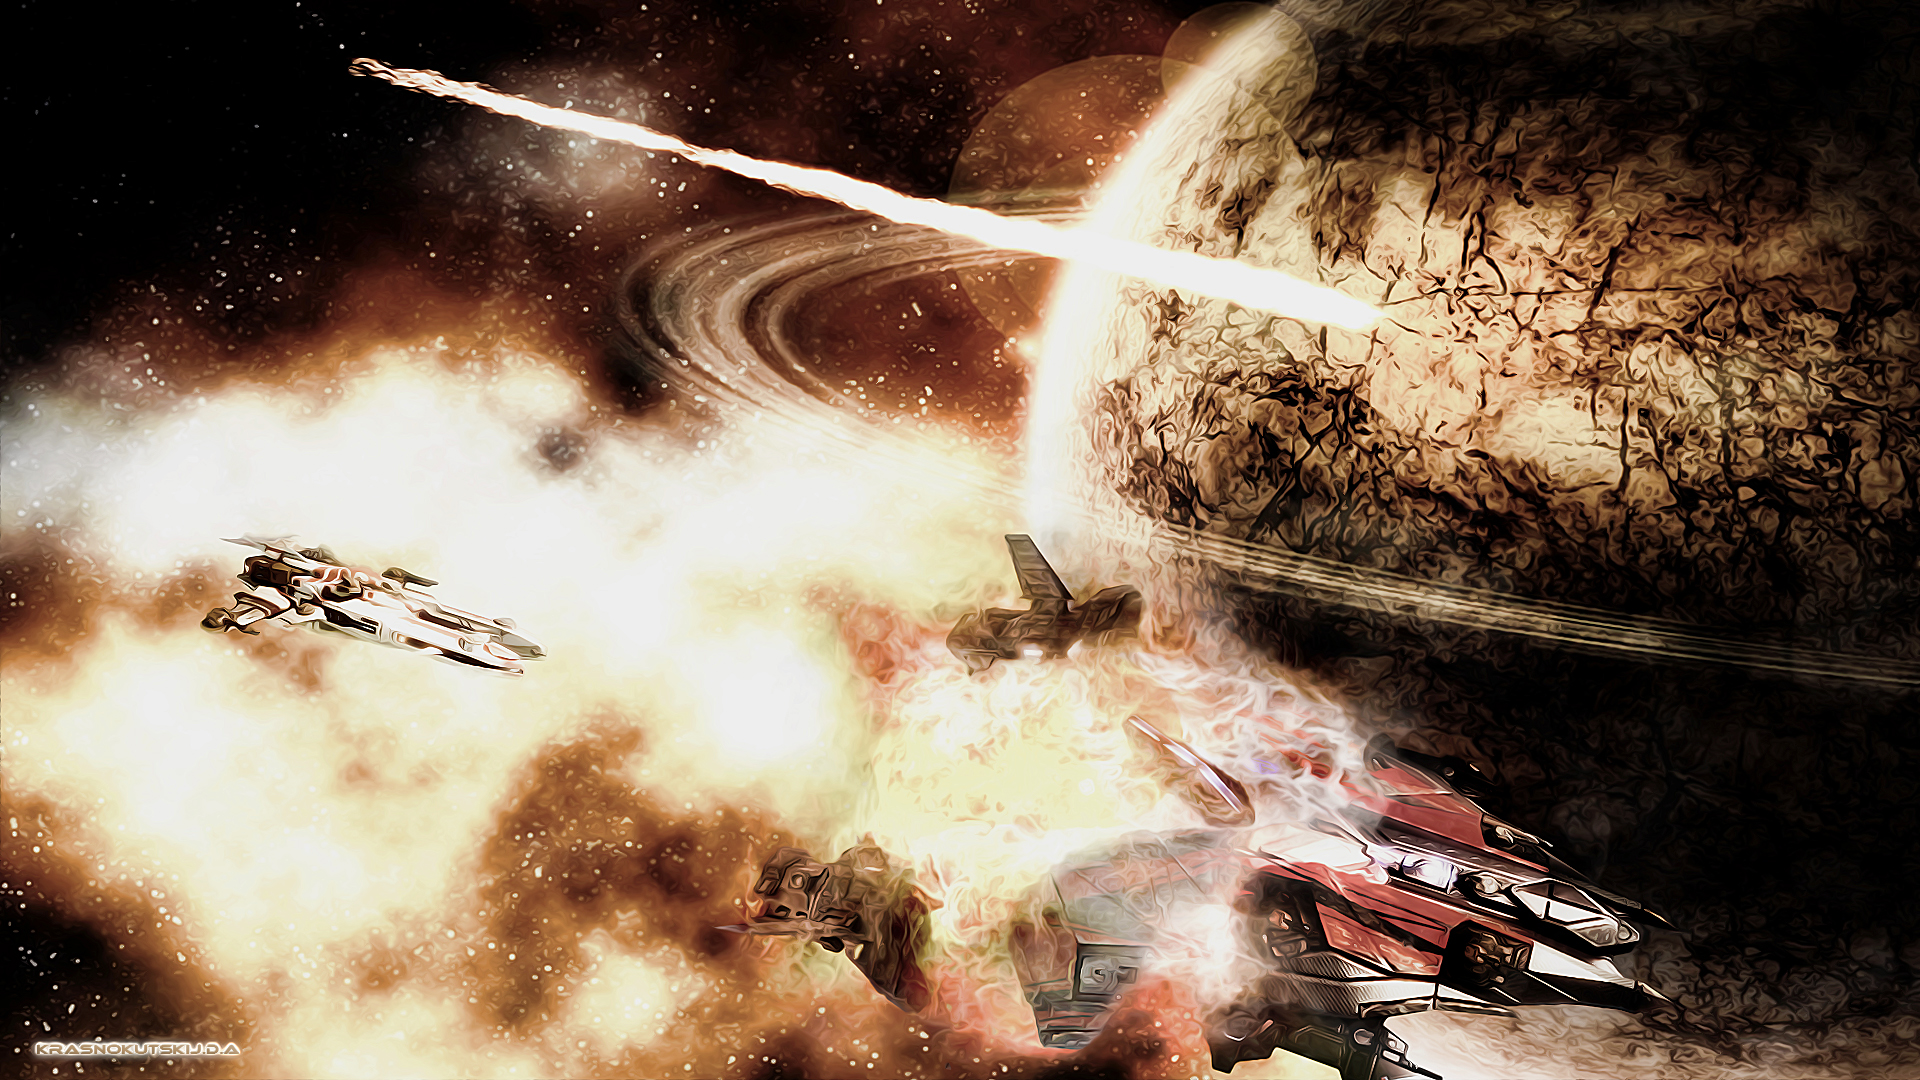 sci fi, Space, Spaceship, Spaceships, Battle, Fire, Explosion, Planet Wallpaper